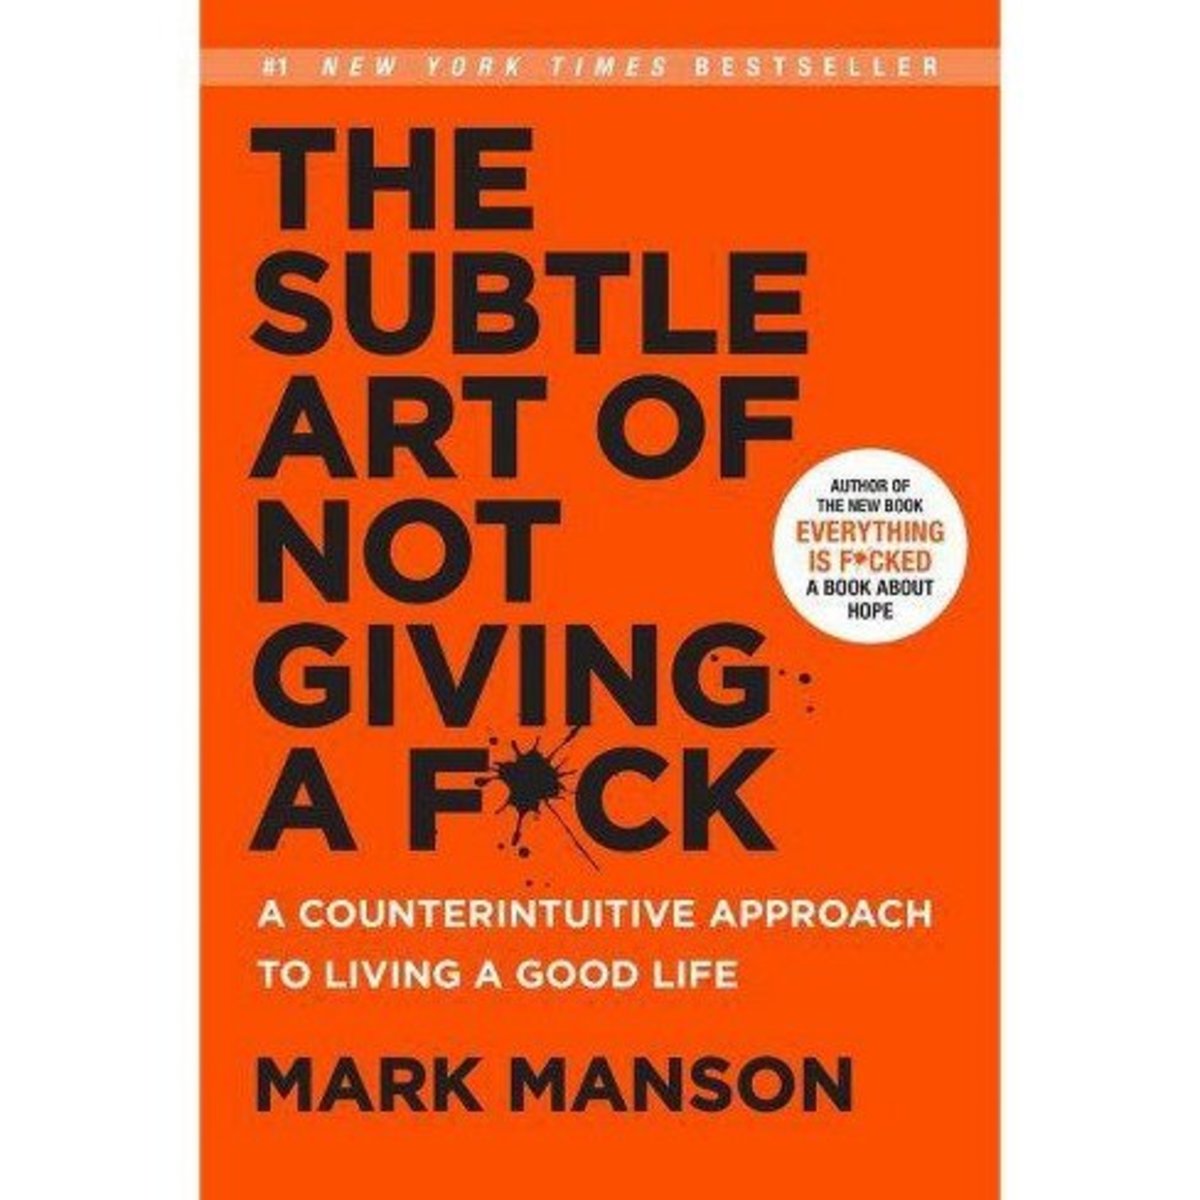 book-review-of-the-subtle-art-of-not-giving-a-fck